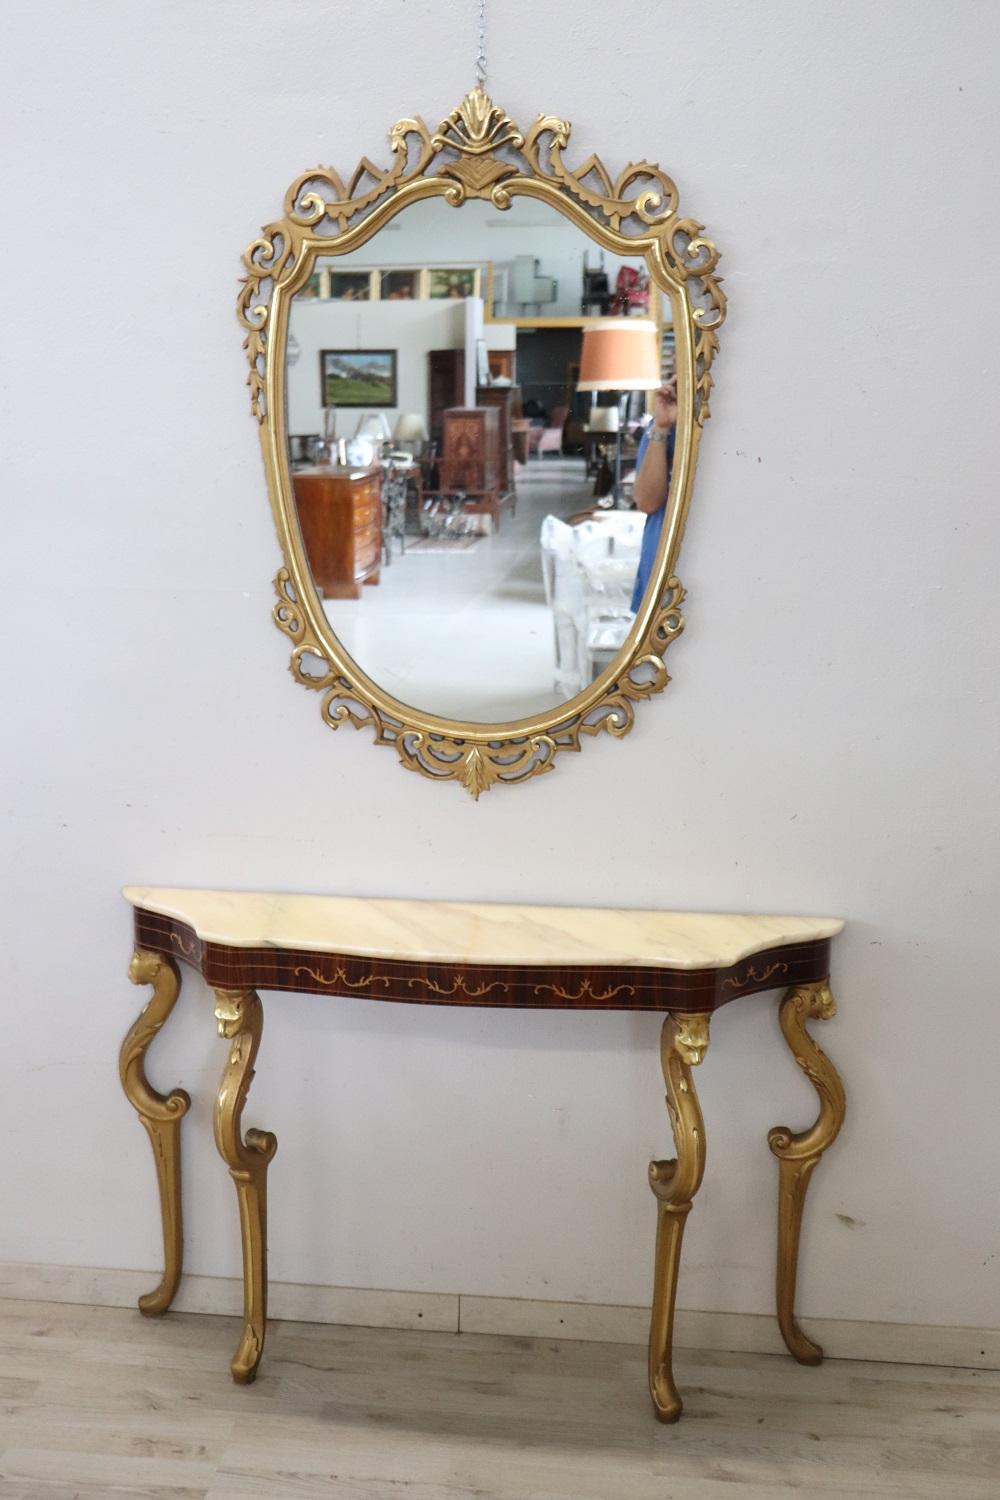 this Italian console made around 1960s is truly refined. Characterized by an eclectic style that combines different decorative elements. The carved wood with gilded elements, the top is in light marble towards the pink. Accompanied by a large mirror